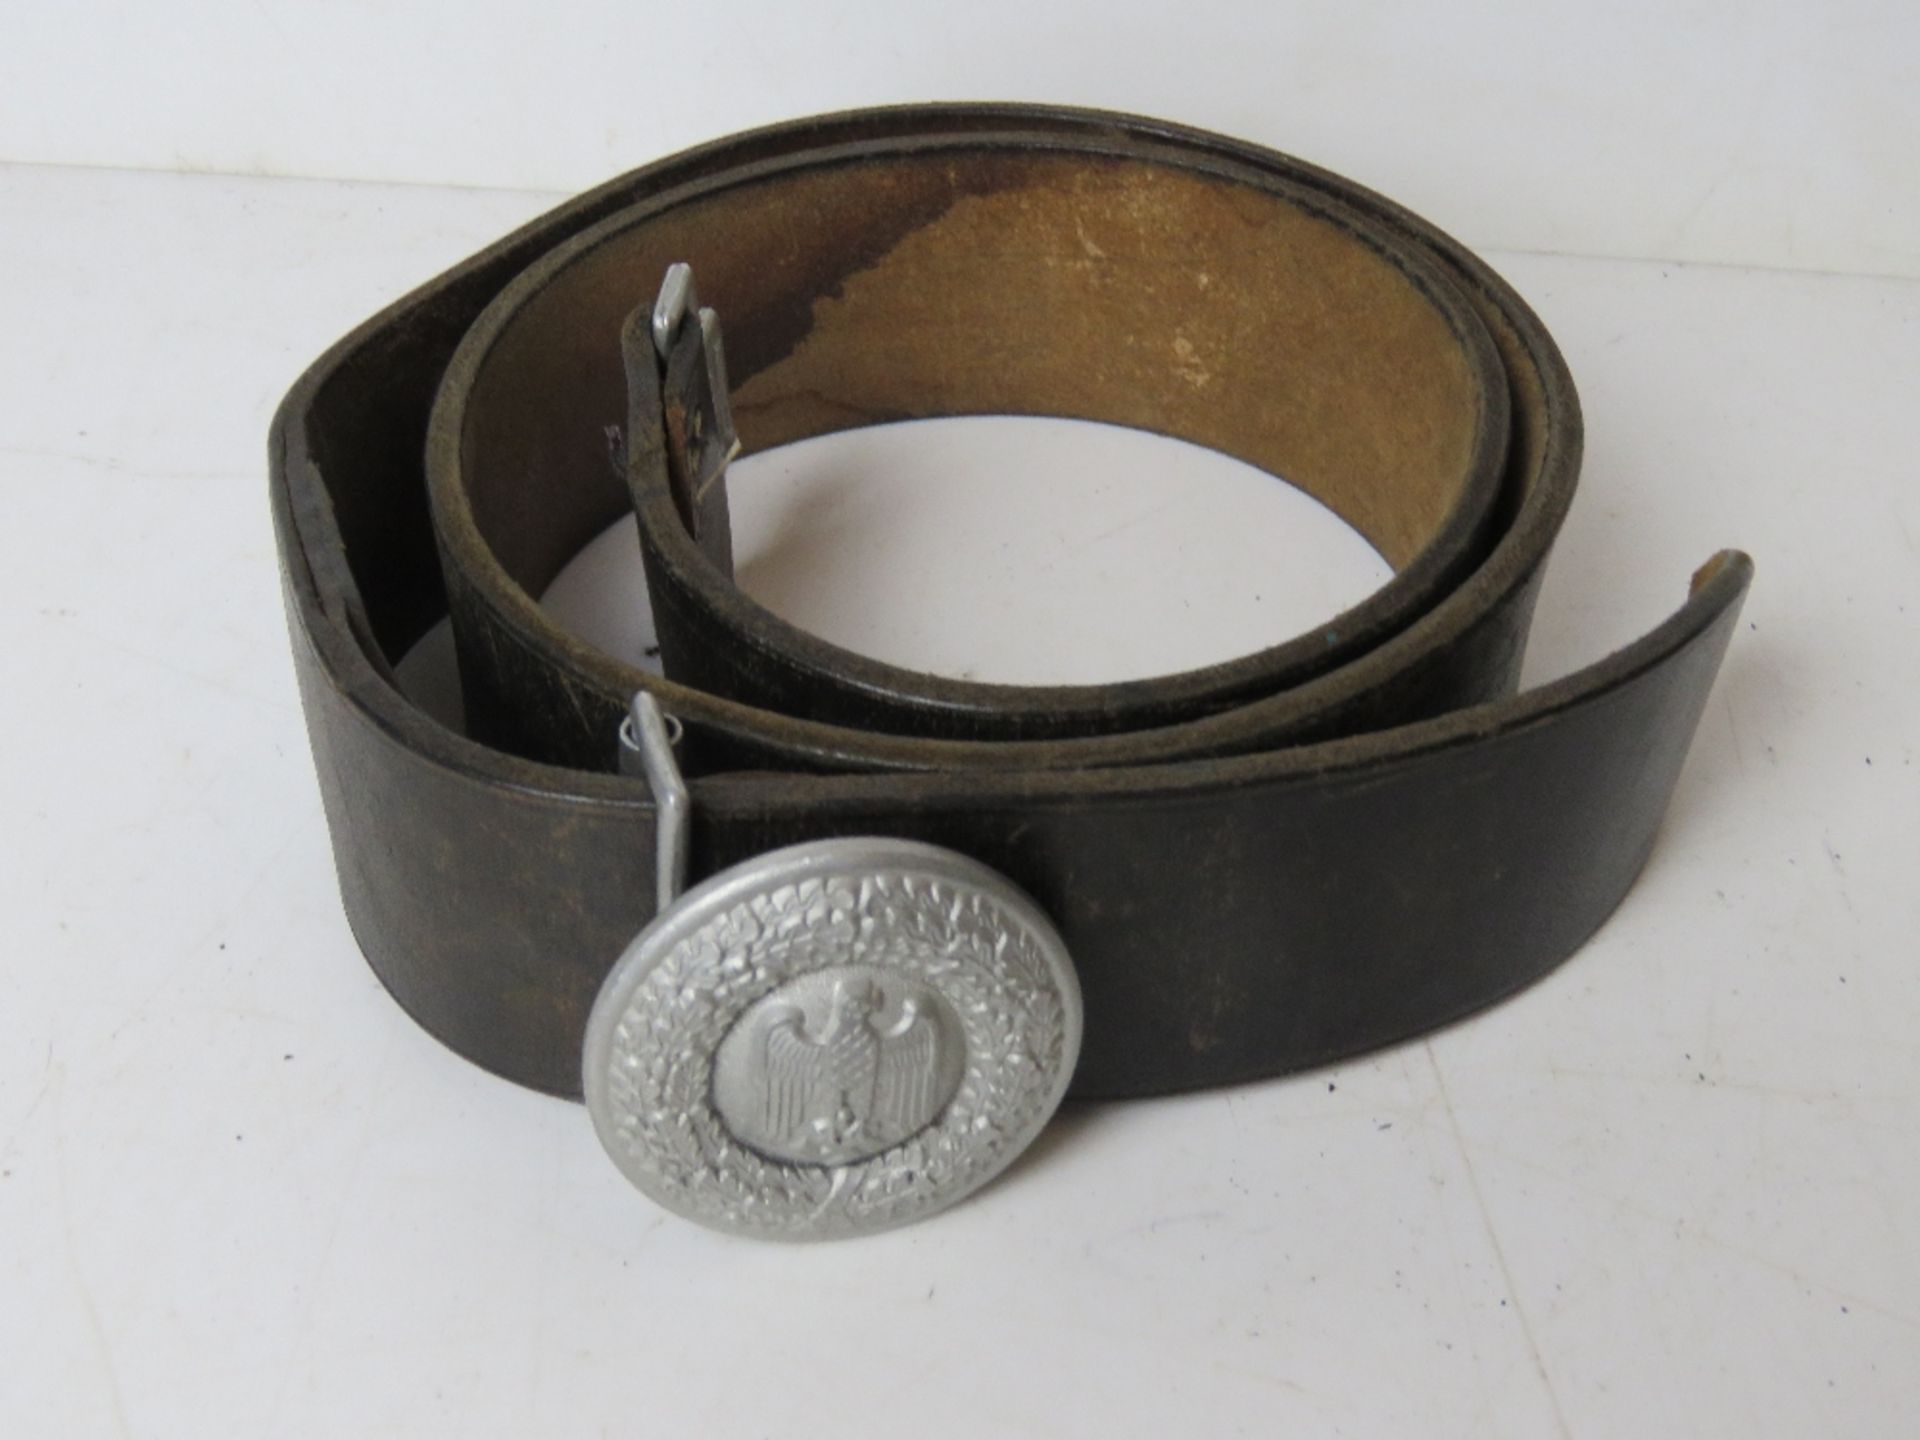 A WWII German Army Officer's Parade Belt Buckle with leather belt,